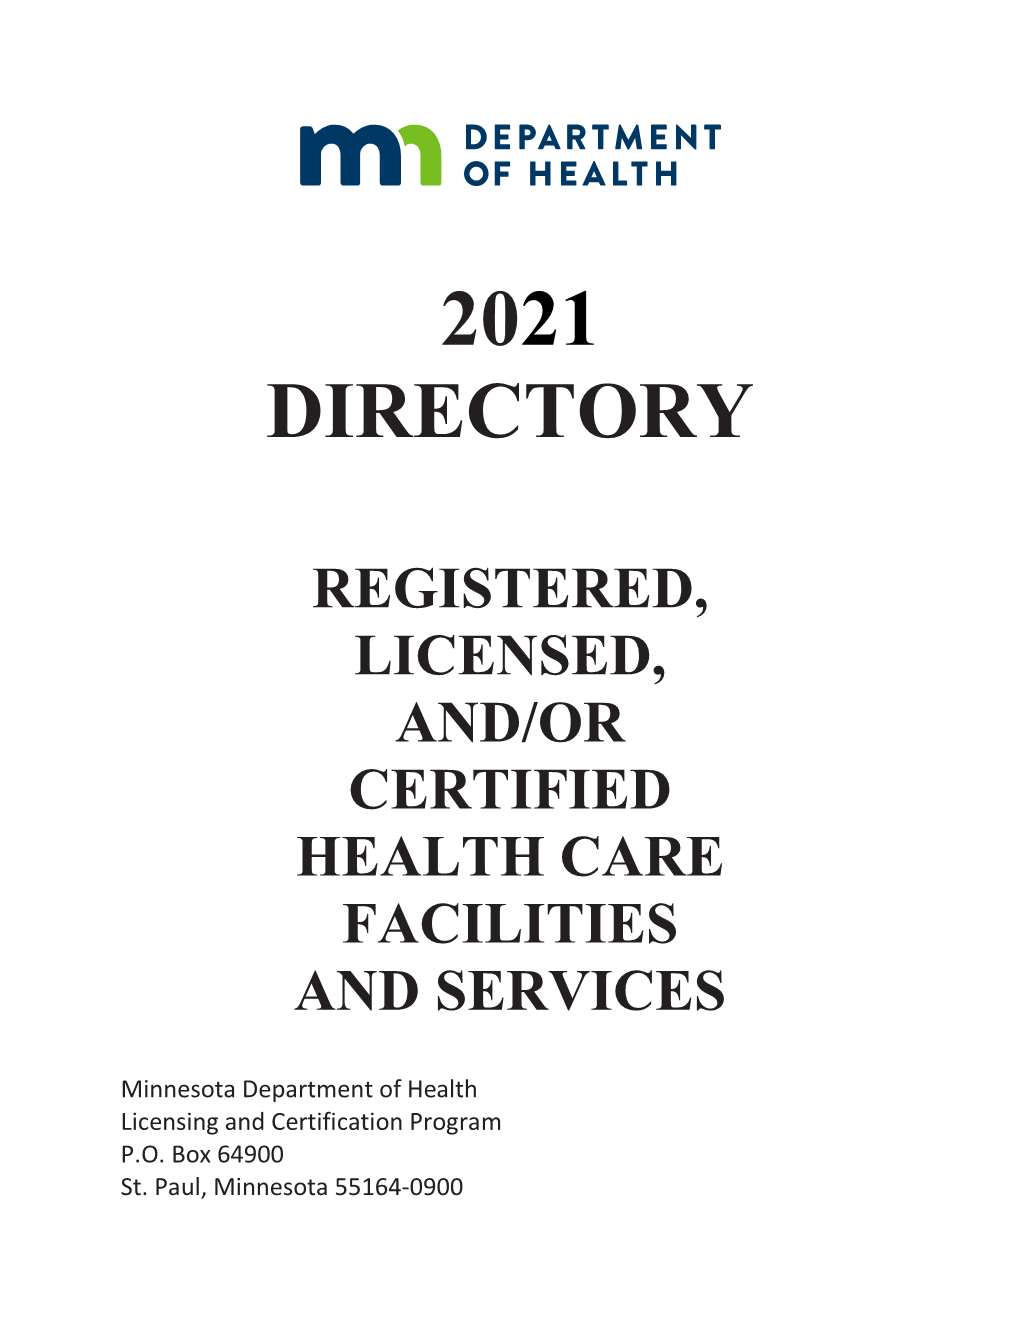 2021 Directory of Licensed and Certified Health Care Facilities (PDF)